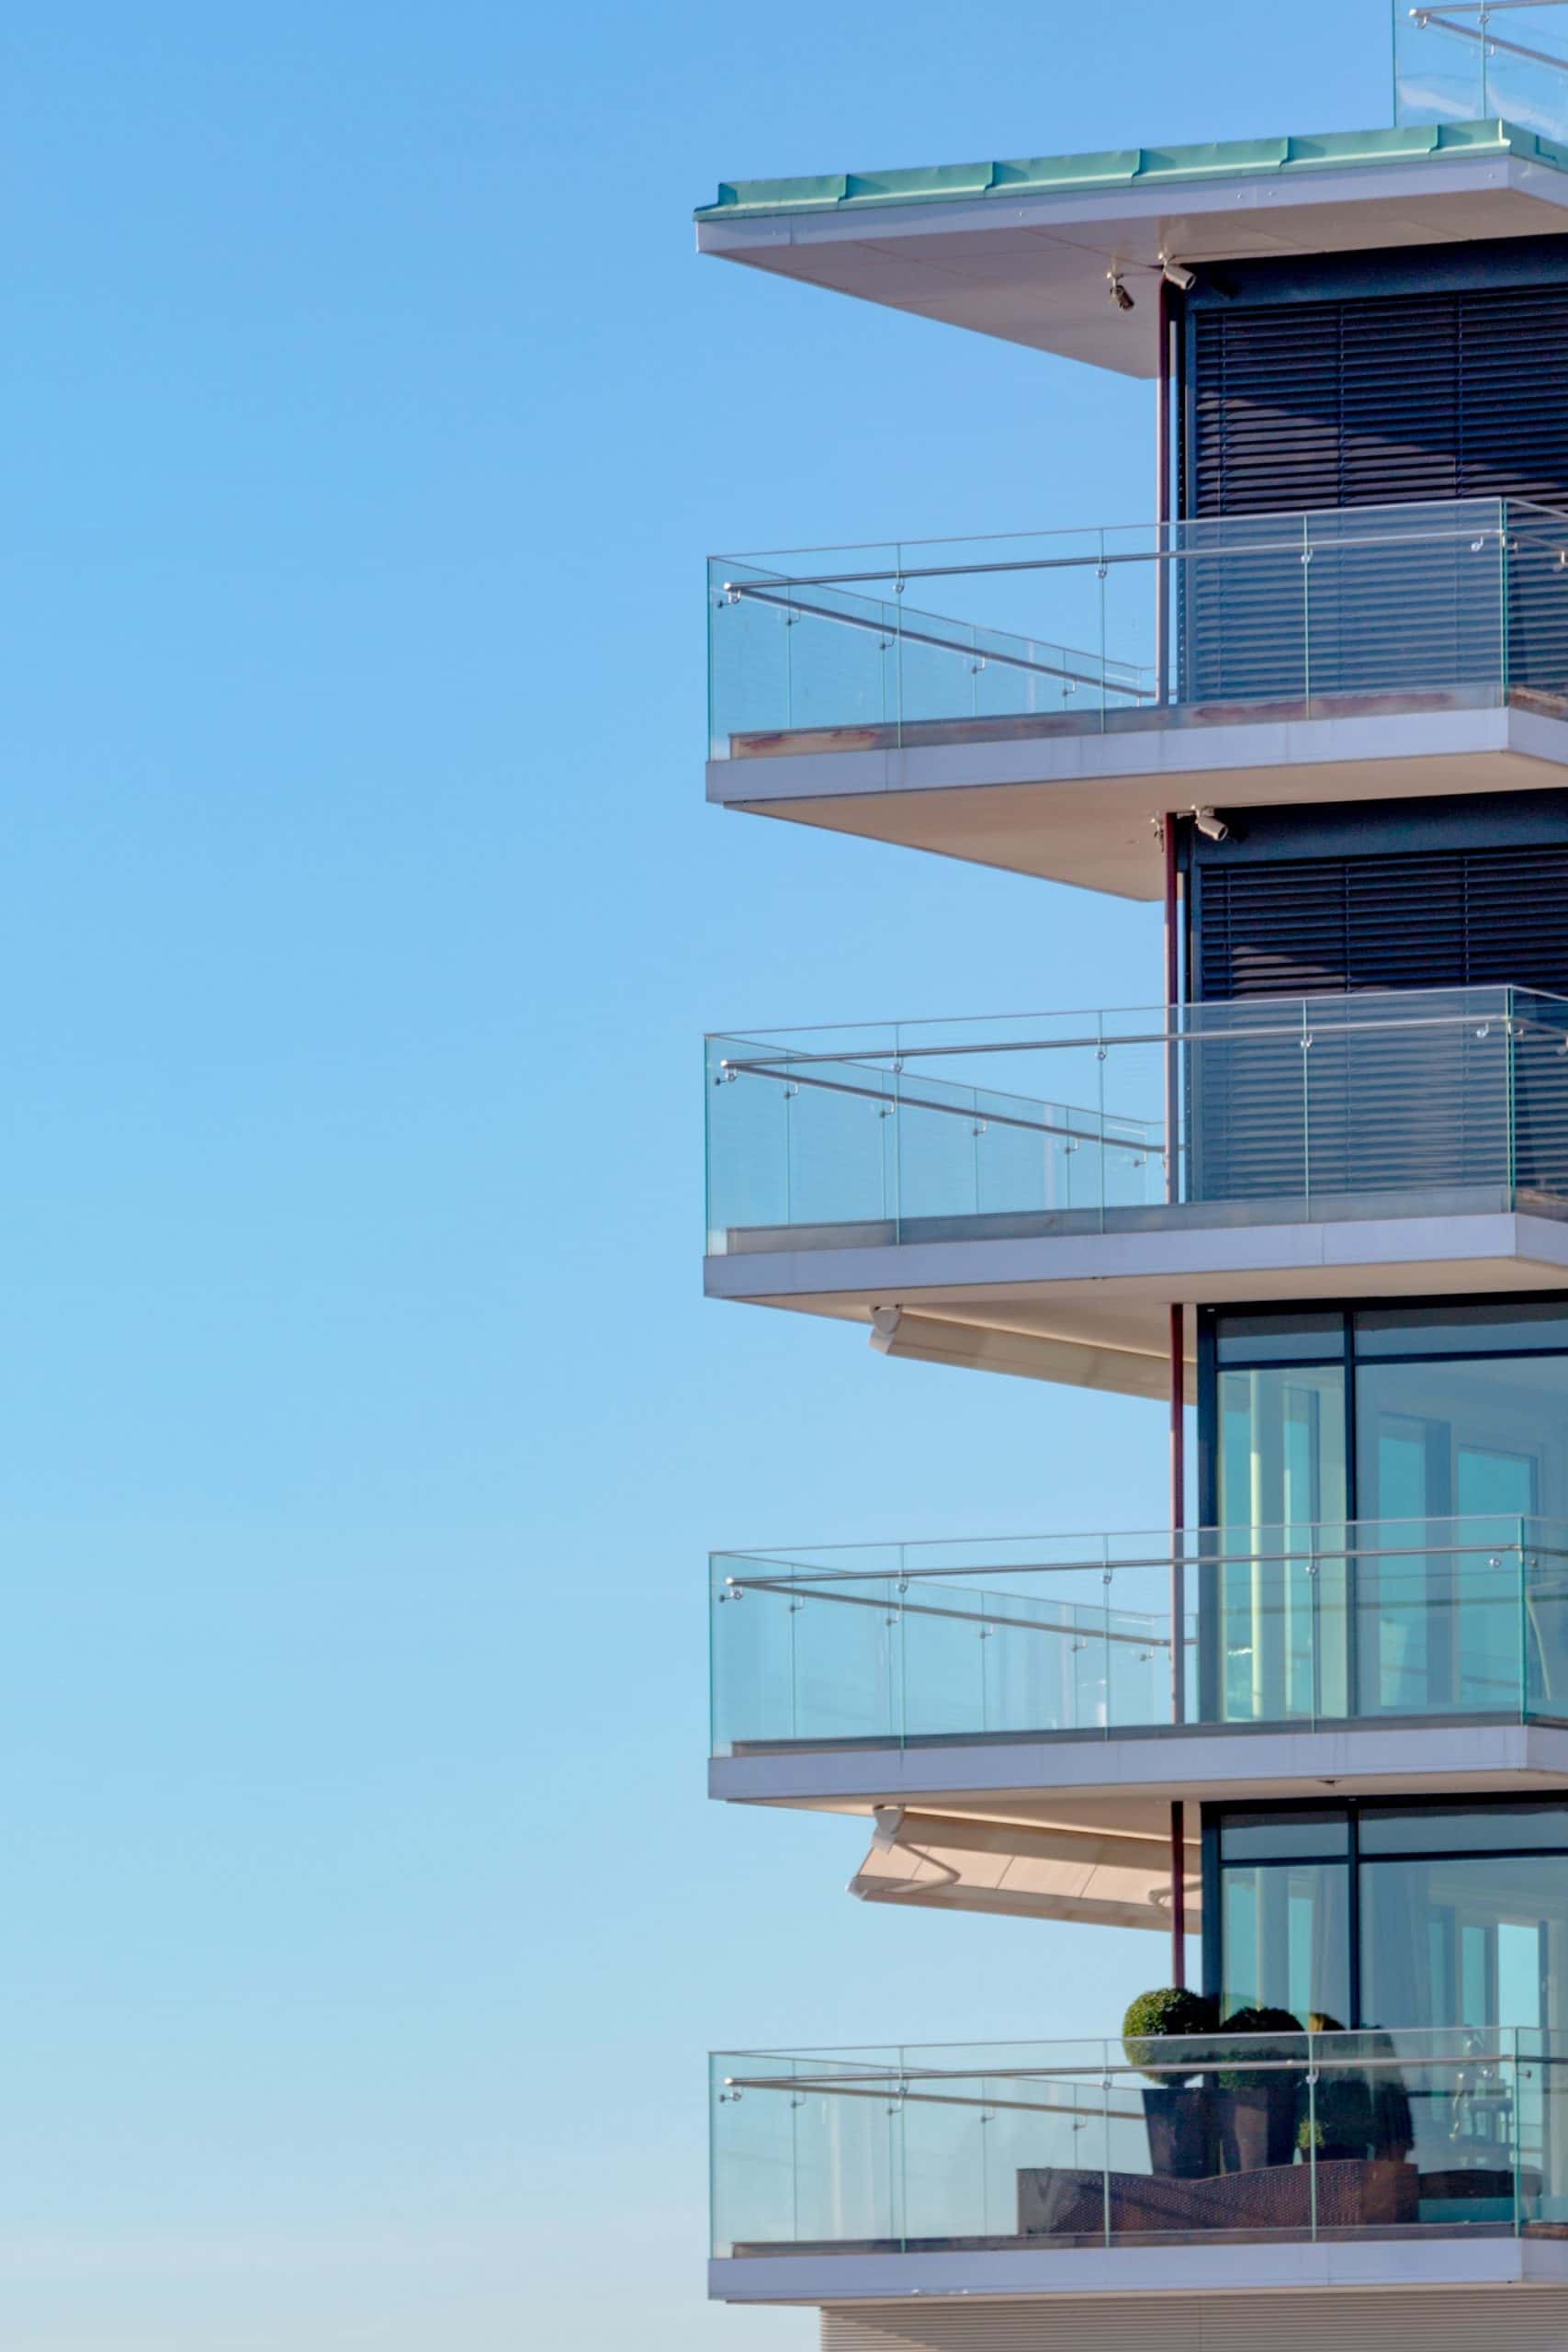 Top 10 Considerations for Balconies and Balcony Railings